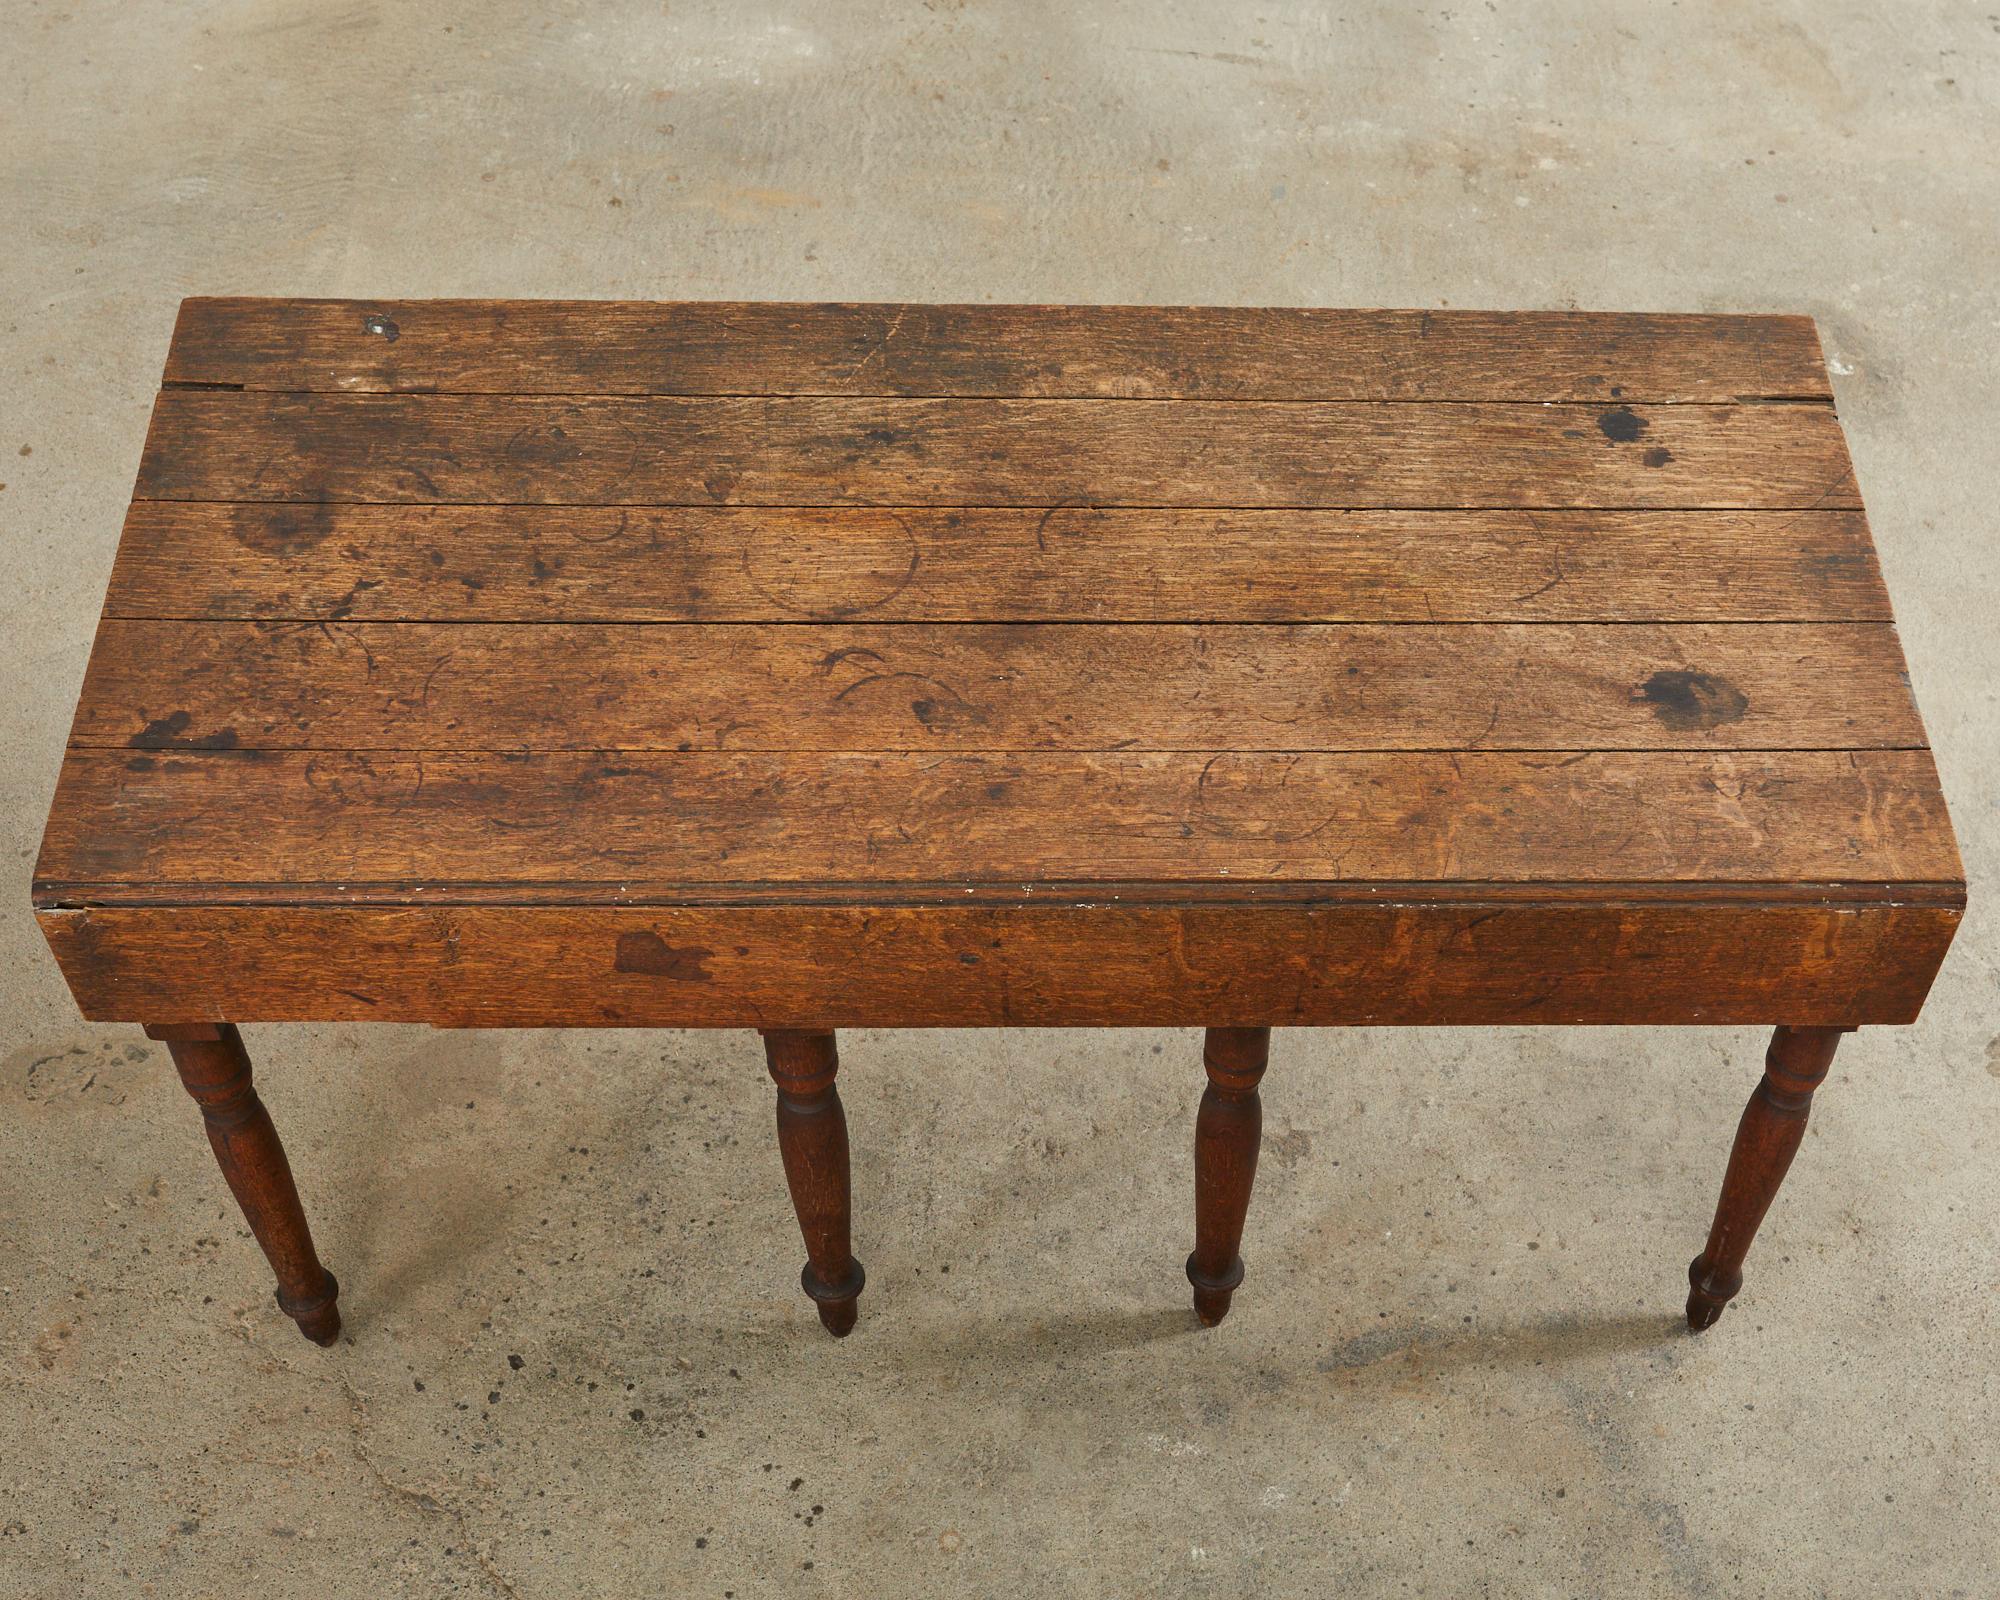 19th Century Country English Oak Drop Leaf Farmhouse Table In Distressed Condition For Sale In Rio Vista, CA